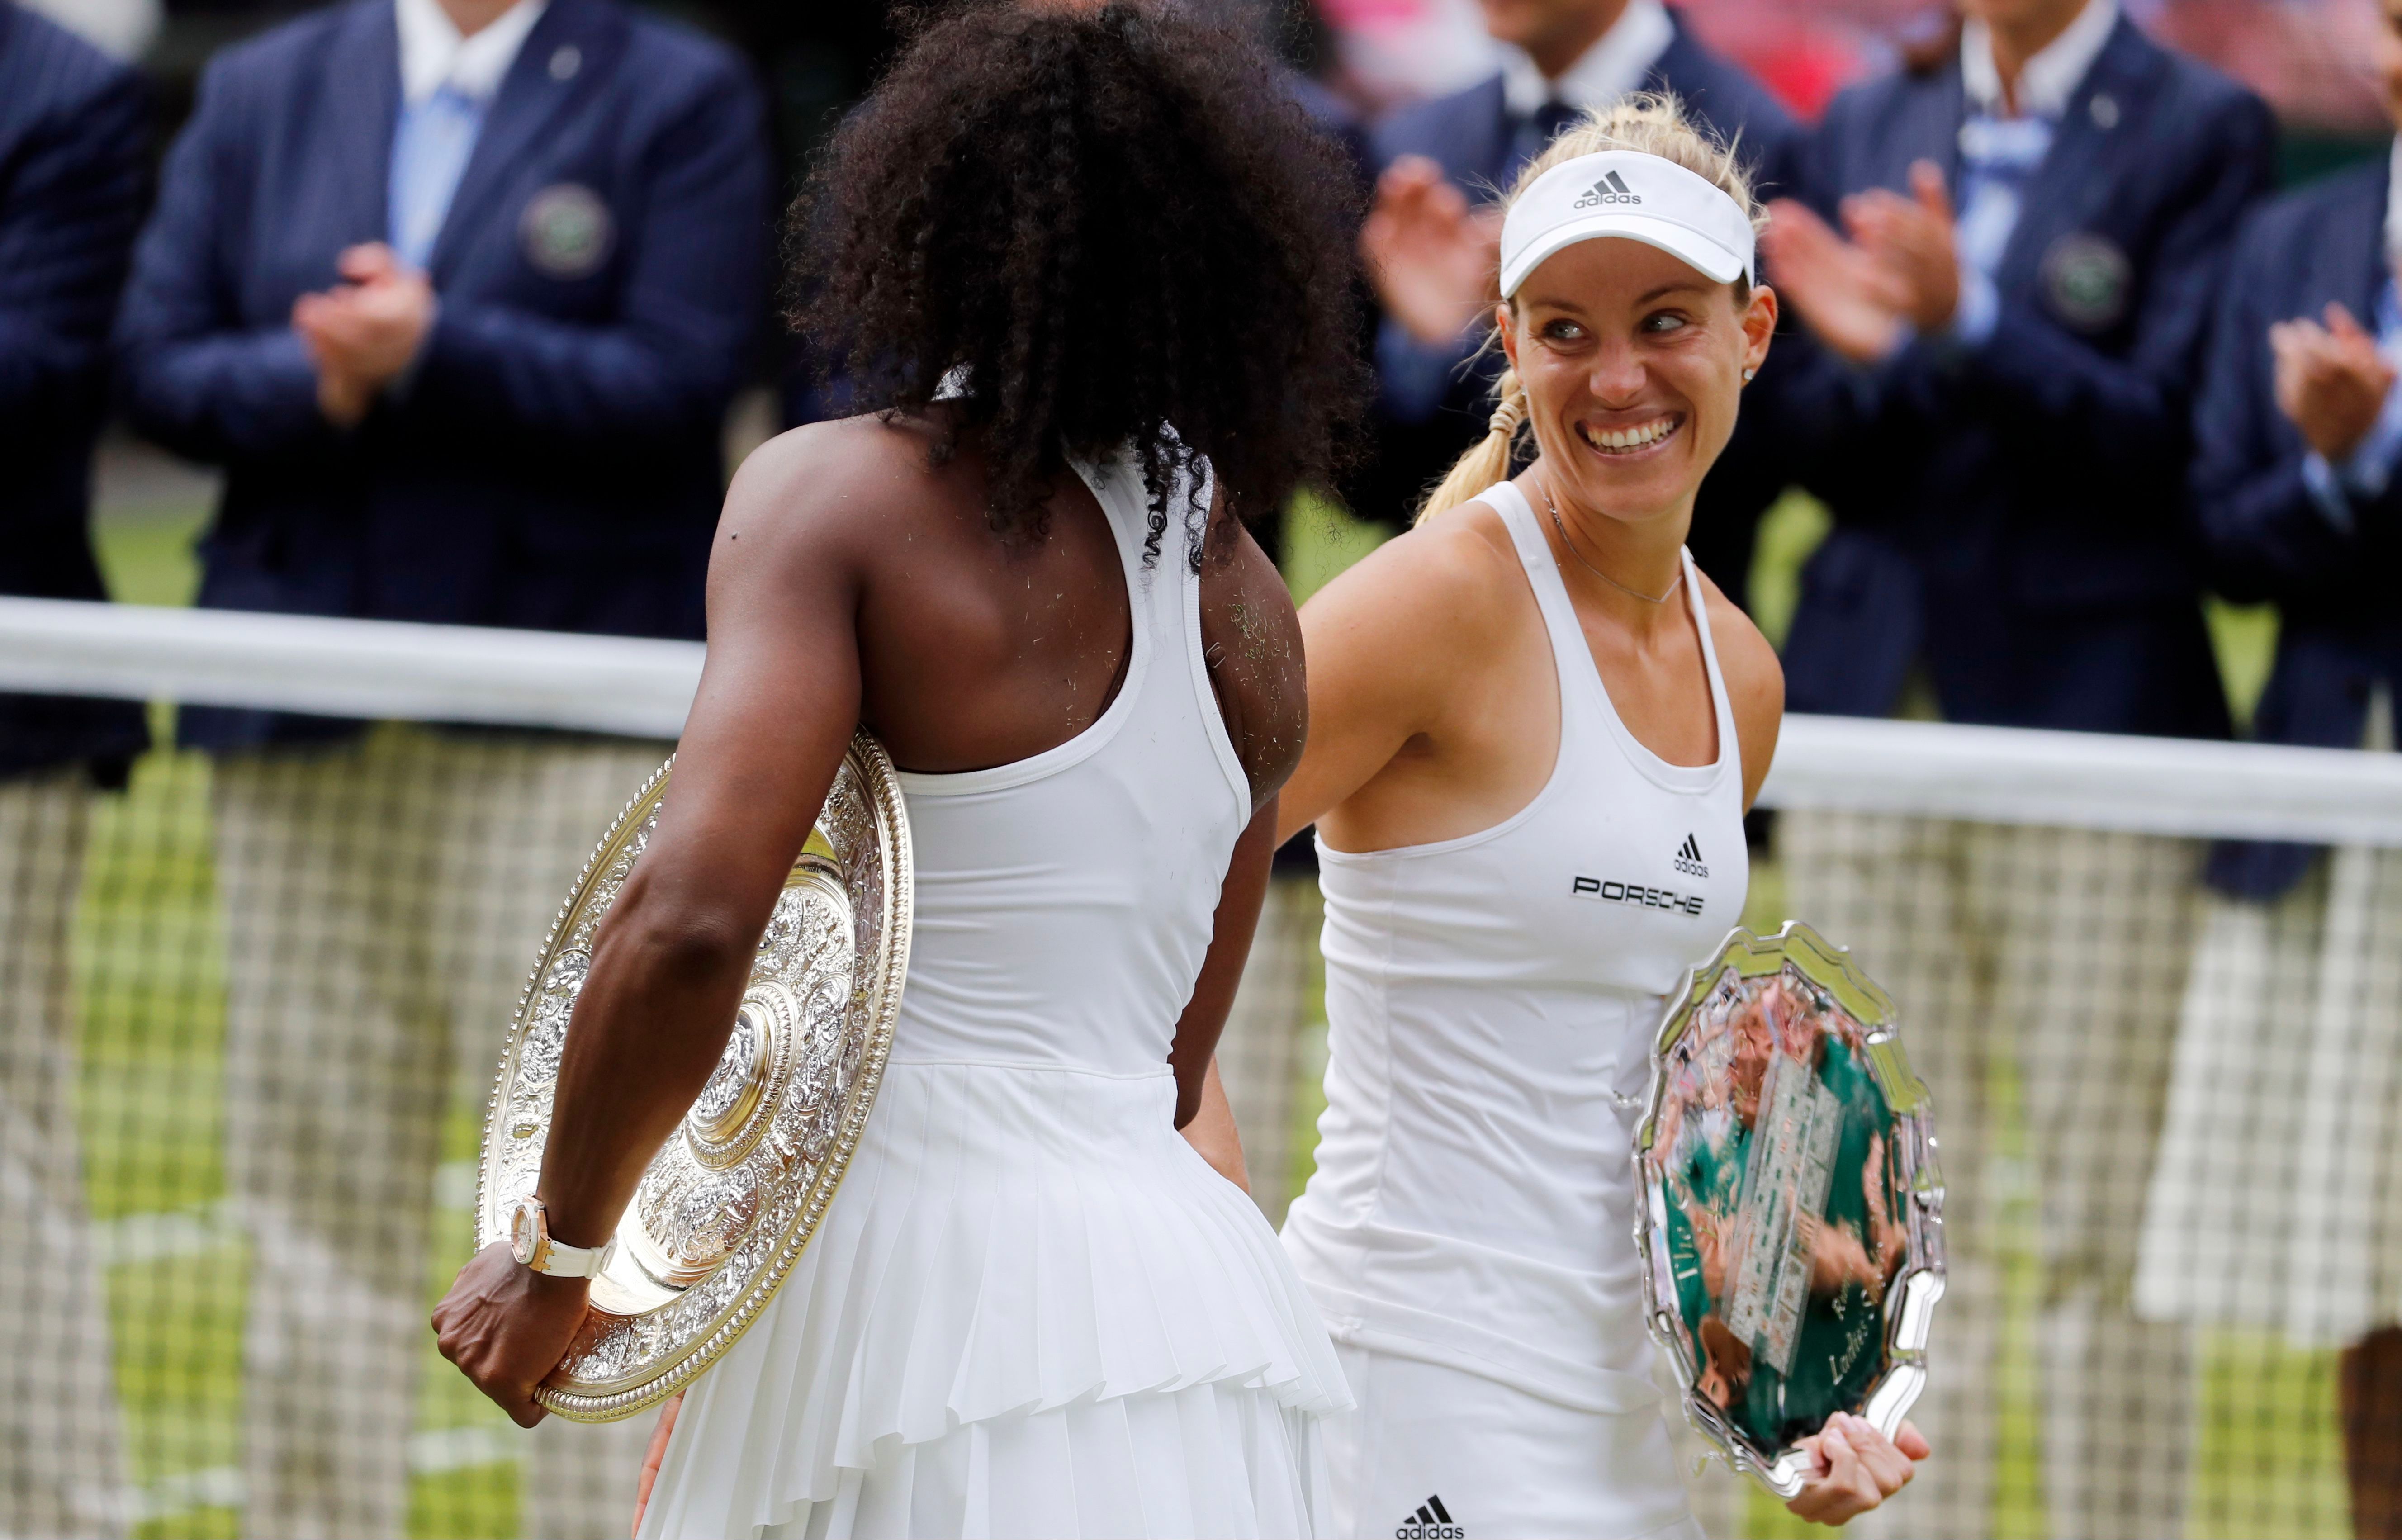 Serena Williams and Angelique Kerber, both wearing white, shake hands.